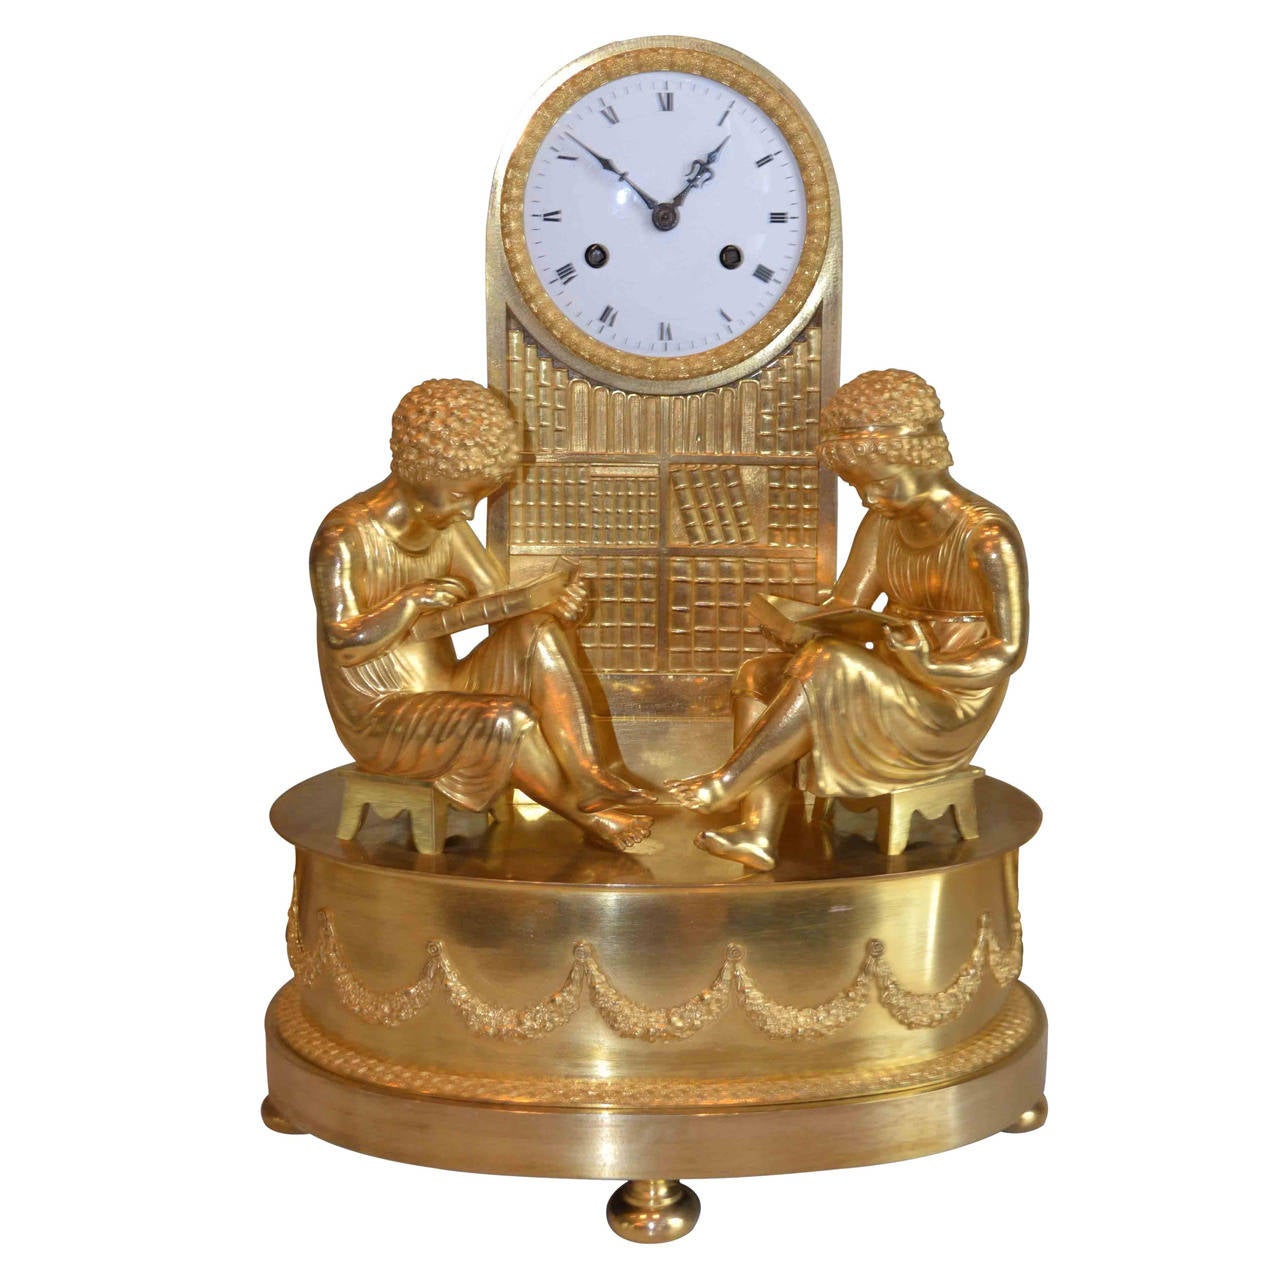 Period French Empire Clock Called 'The Library' For Sale